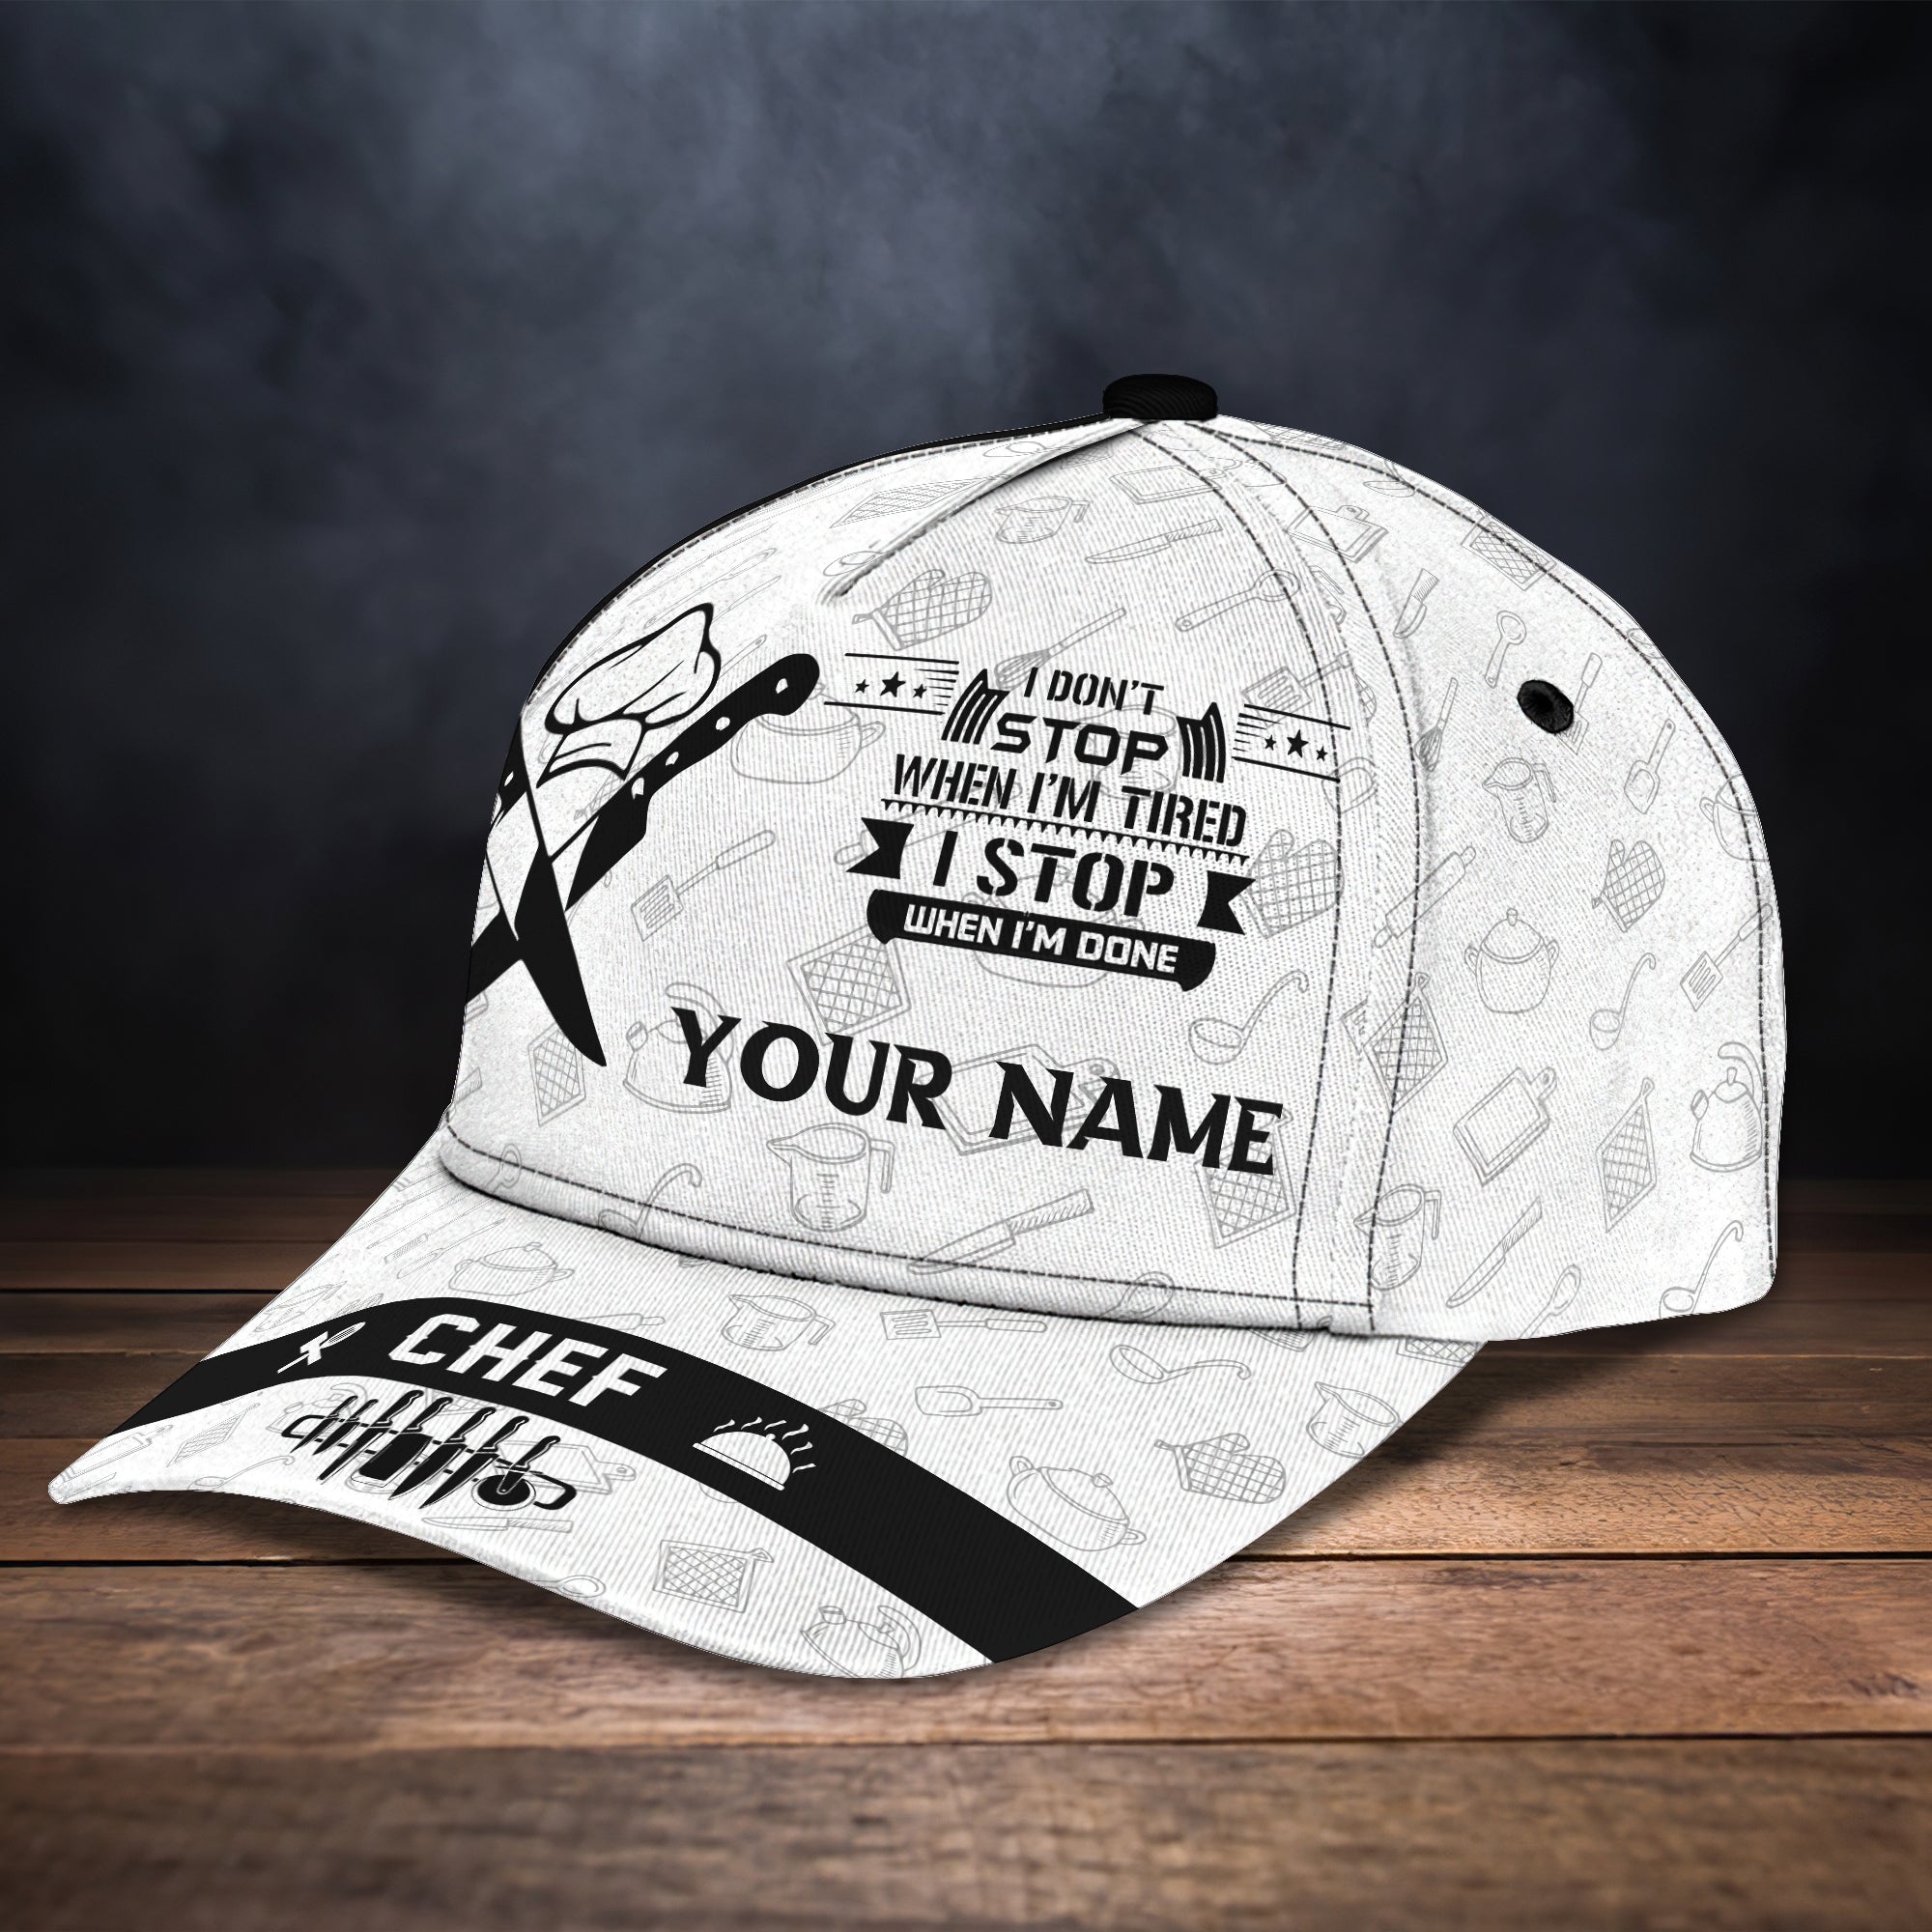 Chef - Personalized Name Cap 30 - Tad